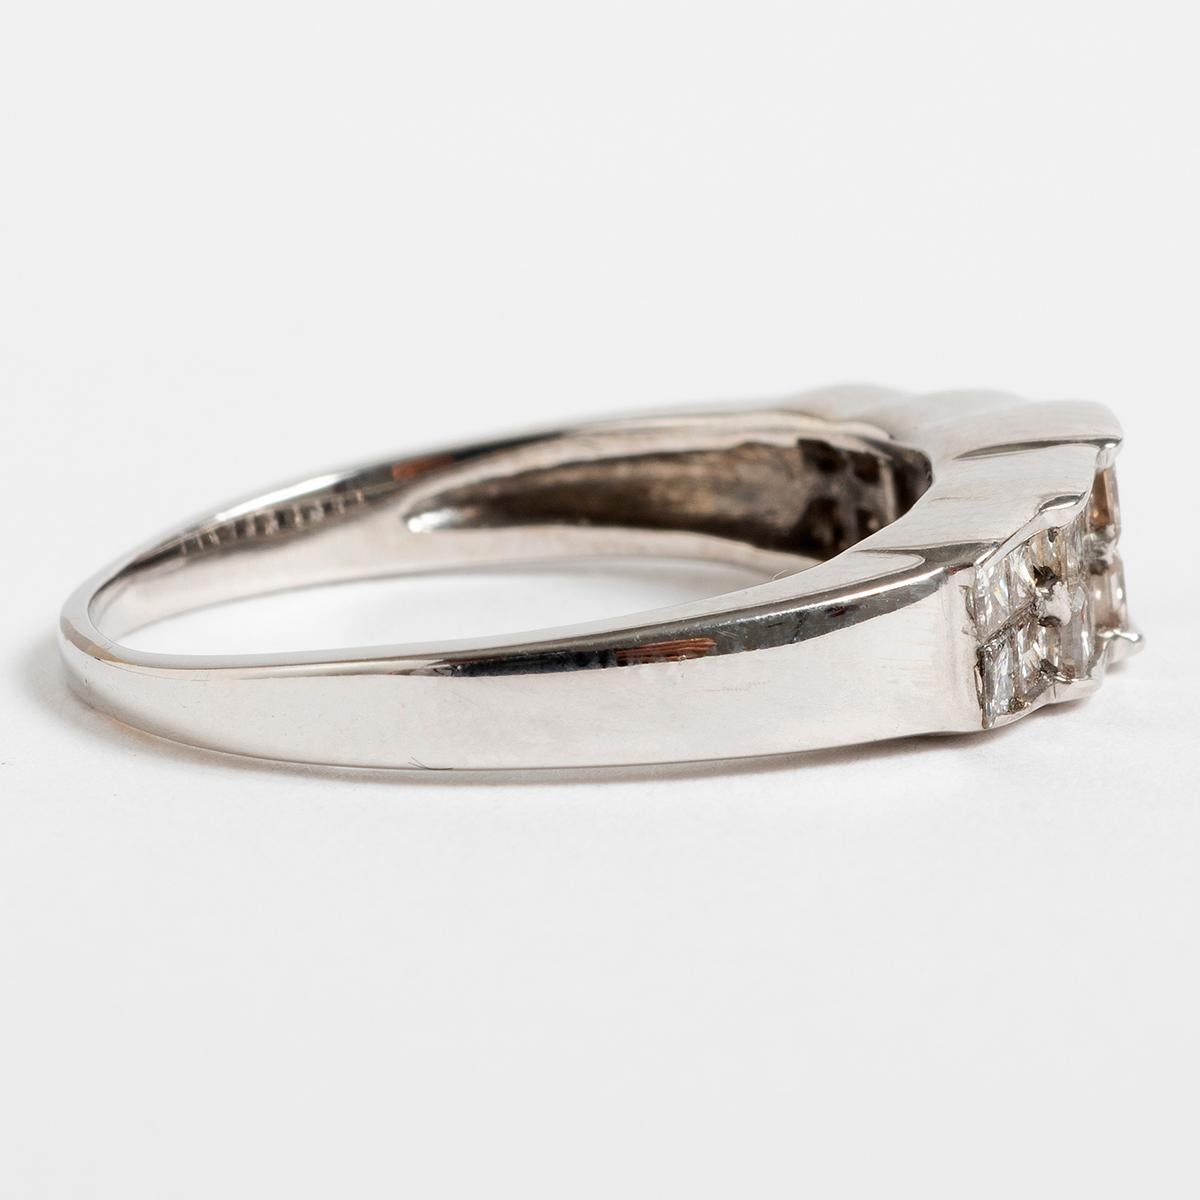 A unique piece within our carefully curated Vintage & Prestige fine jewellery collection, we are delighted to present the following:

This stunning princess diamond set dress ring is set among 14K White Gold and is Est 1.8ct. This ring is UK size R,